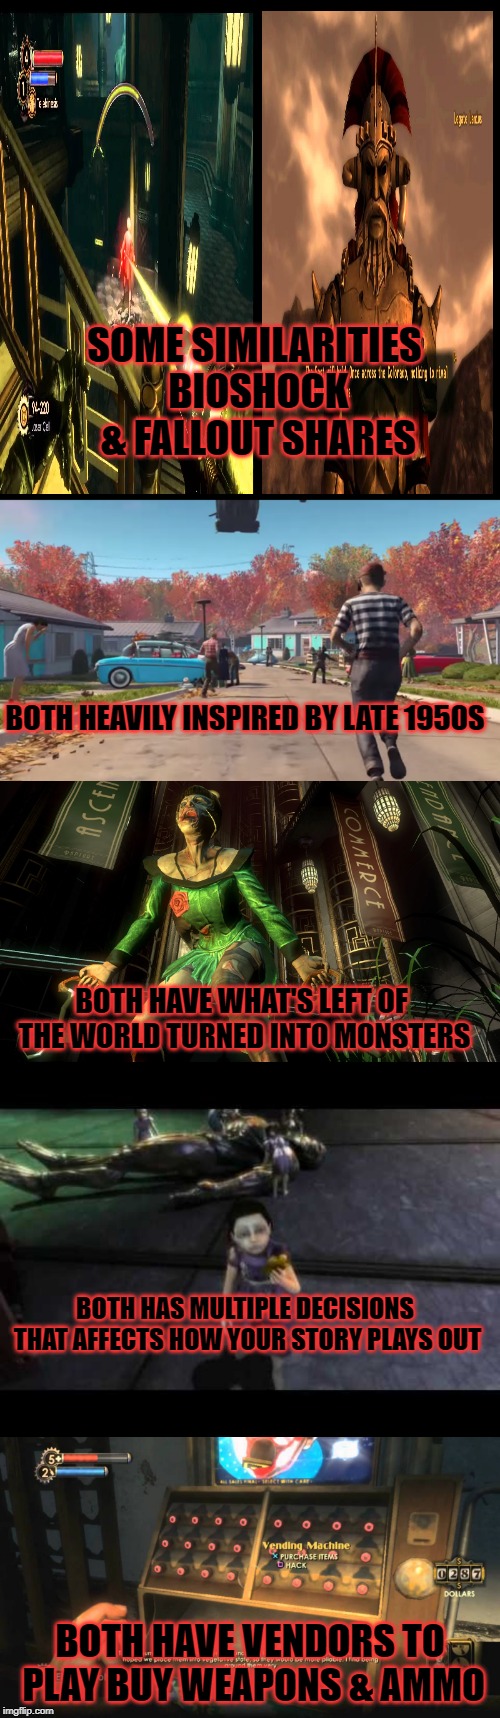 SOME SIMILARITIES BIOSHOCK & FALLOUT SHARES; BOTH HEAVILY INSPIRED BY LATE 1950S; BOTH HAVE WHAT'S LEFT OF THE WORLD TURNED INTO MONSTERS; BOTH HAS MULTIPLE DECISIONS THAT AFFECTS HOW YOUR STORY PLAYS OUT; BOTH HAVE VENDORS TO PLAY BUY WEAPONS & AMMO | image tagged in fps,fallout,1950s,horror | made w/ Imgflip meme maker